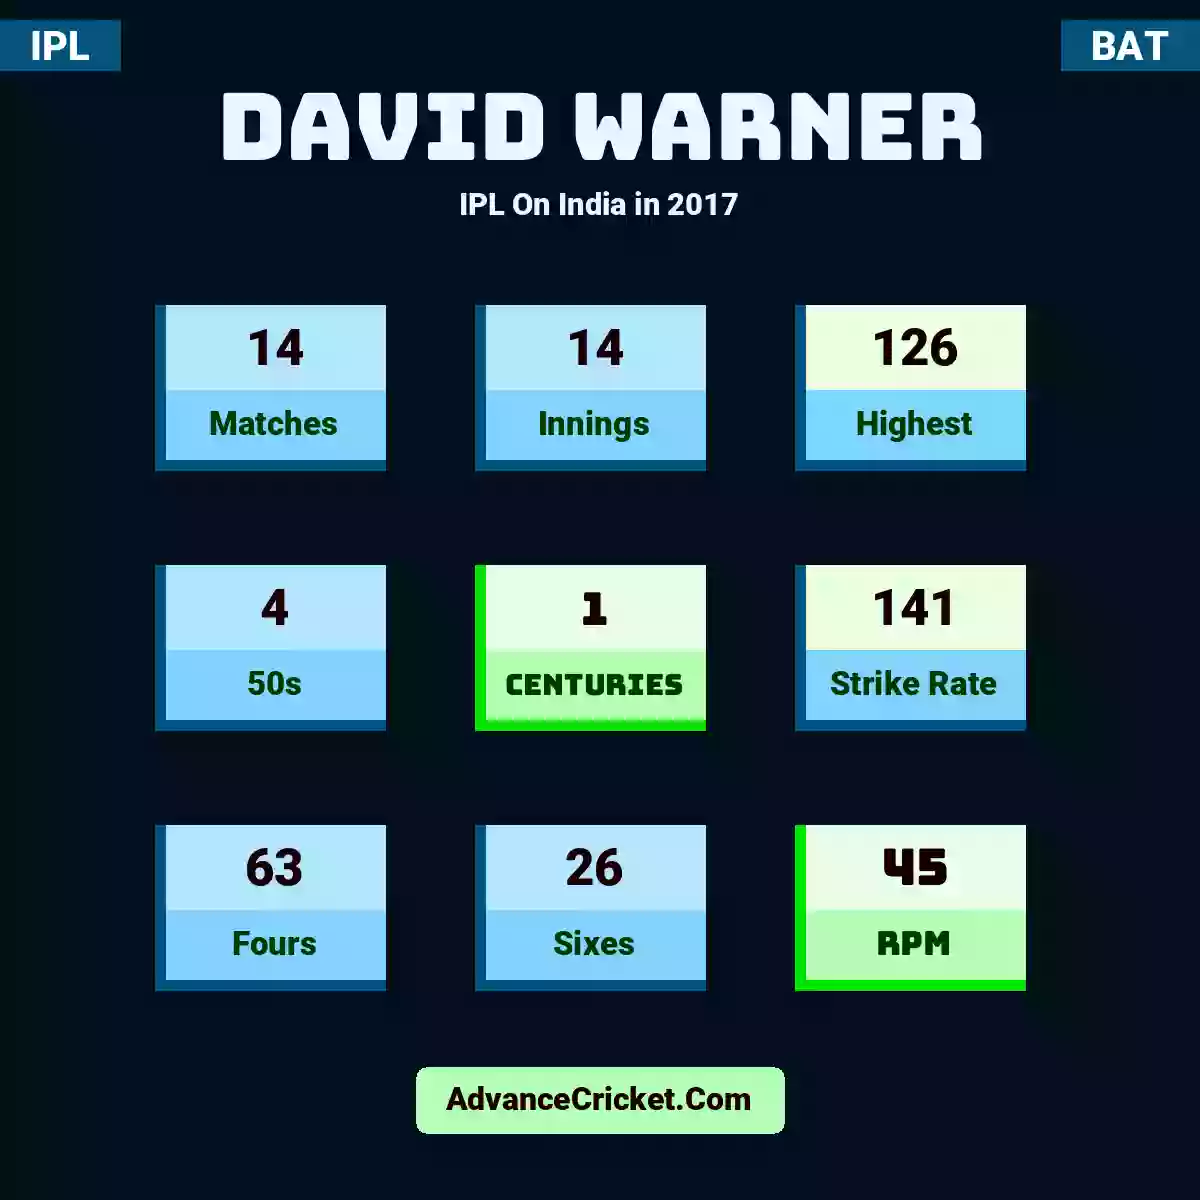 David Warner IPL  On India in 2017, David Warner played 14 matches, scored 126 runs as highest, 4 half-centuries, and 1 centuries, with a strike rate of 141. D.Warner hit 63 fours and 26 sixes, with an RPM of 45.